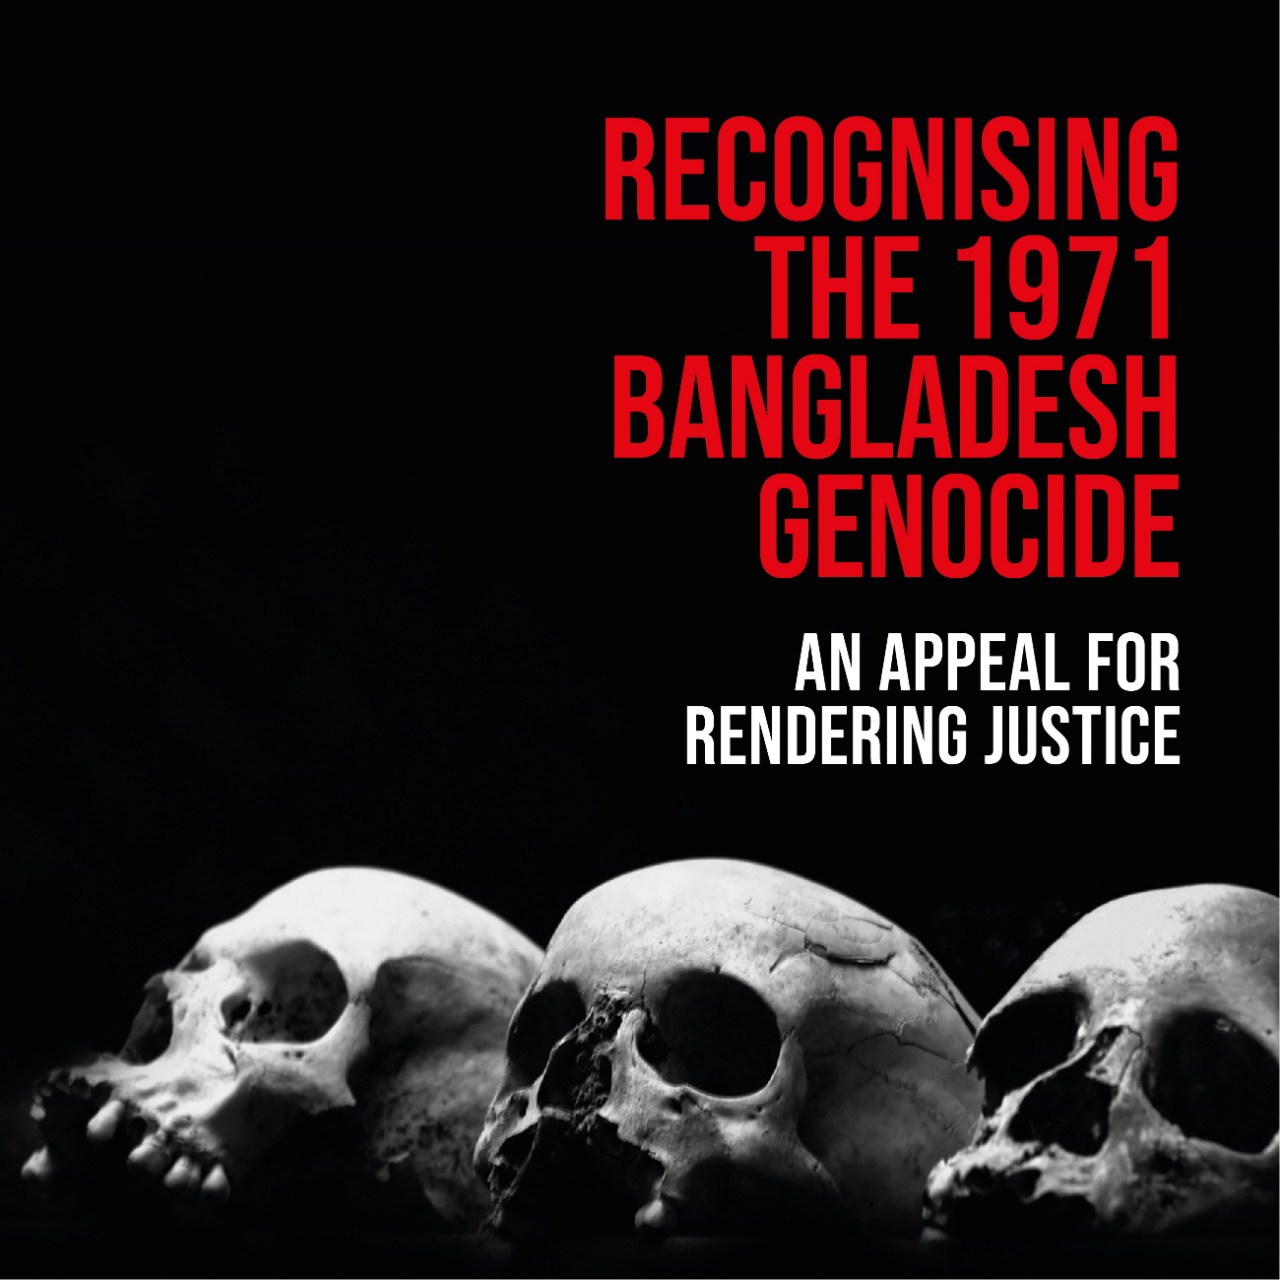 Recognising the 1971 Bangladesh Genocide: An Appeal for Rendering Justice